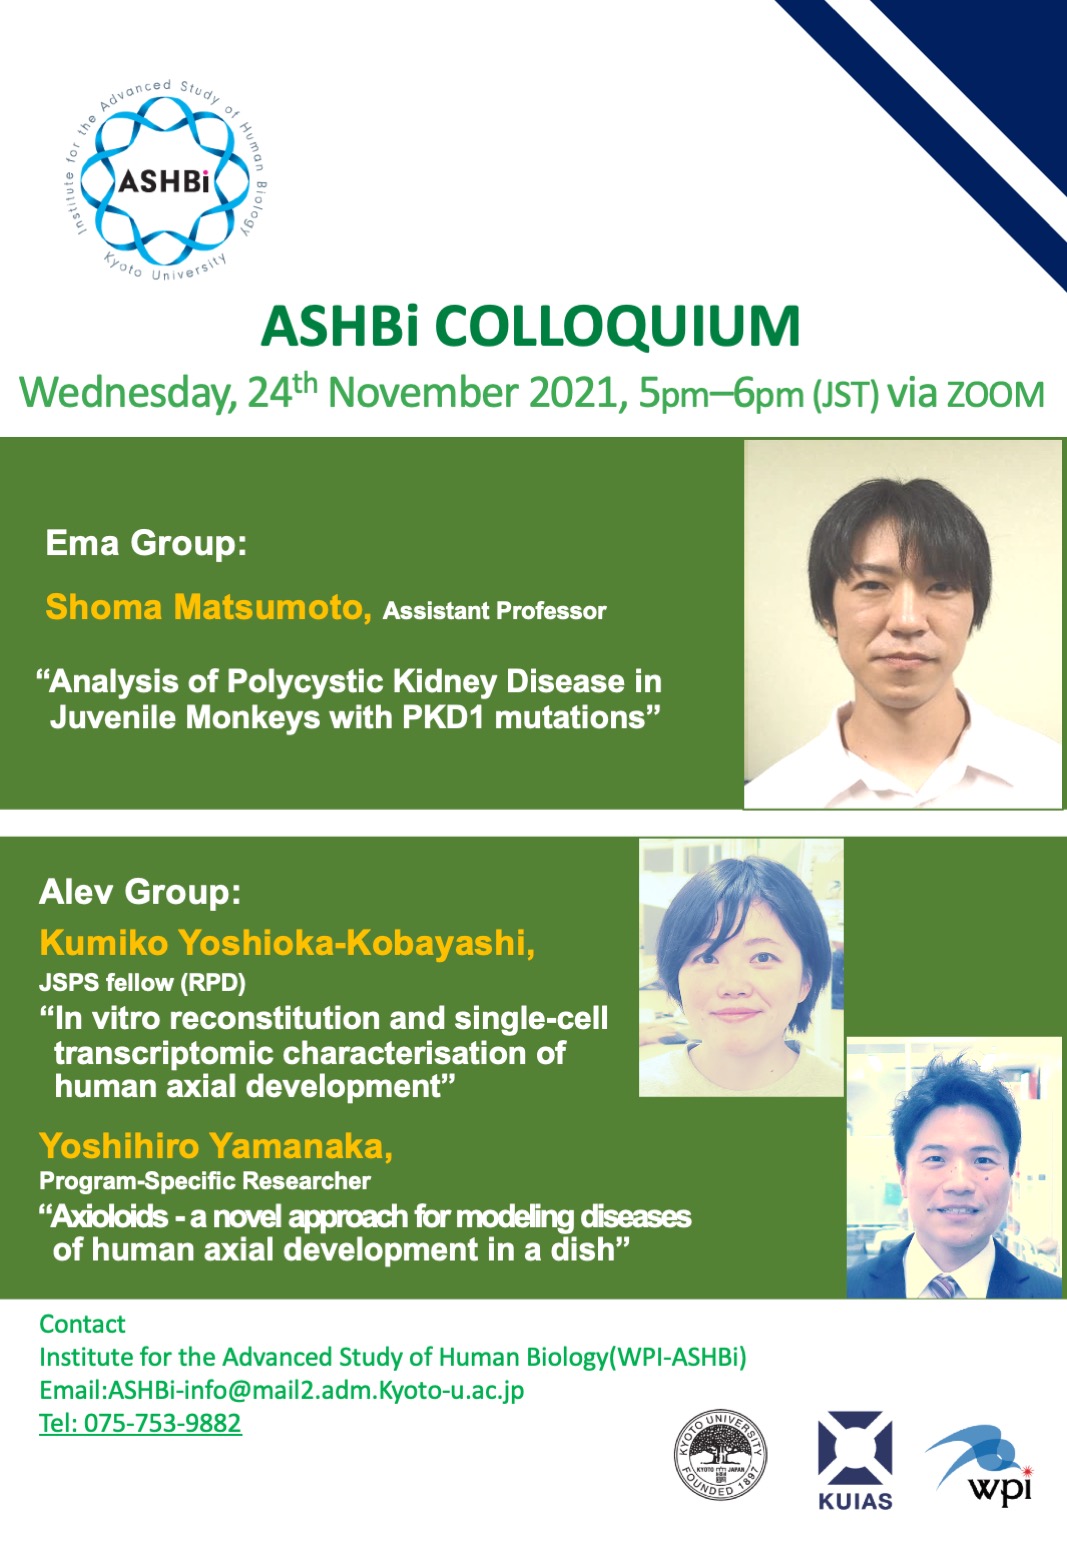 21st ASHBi Colloquium (Ema Group and Alev Group)